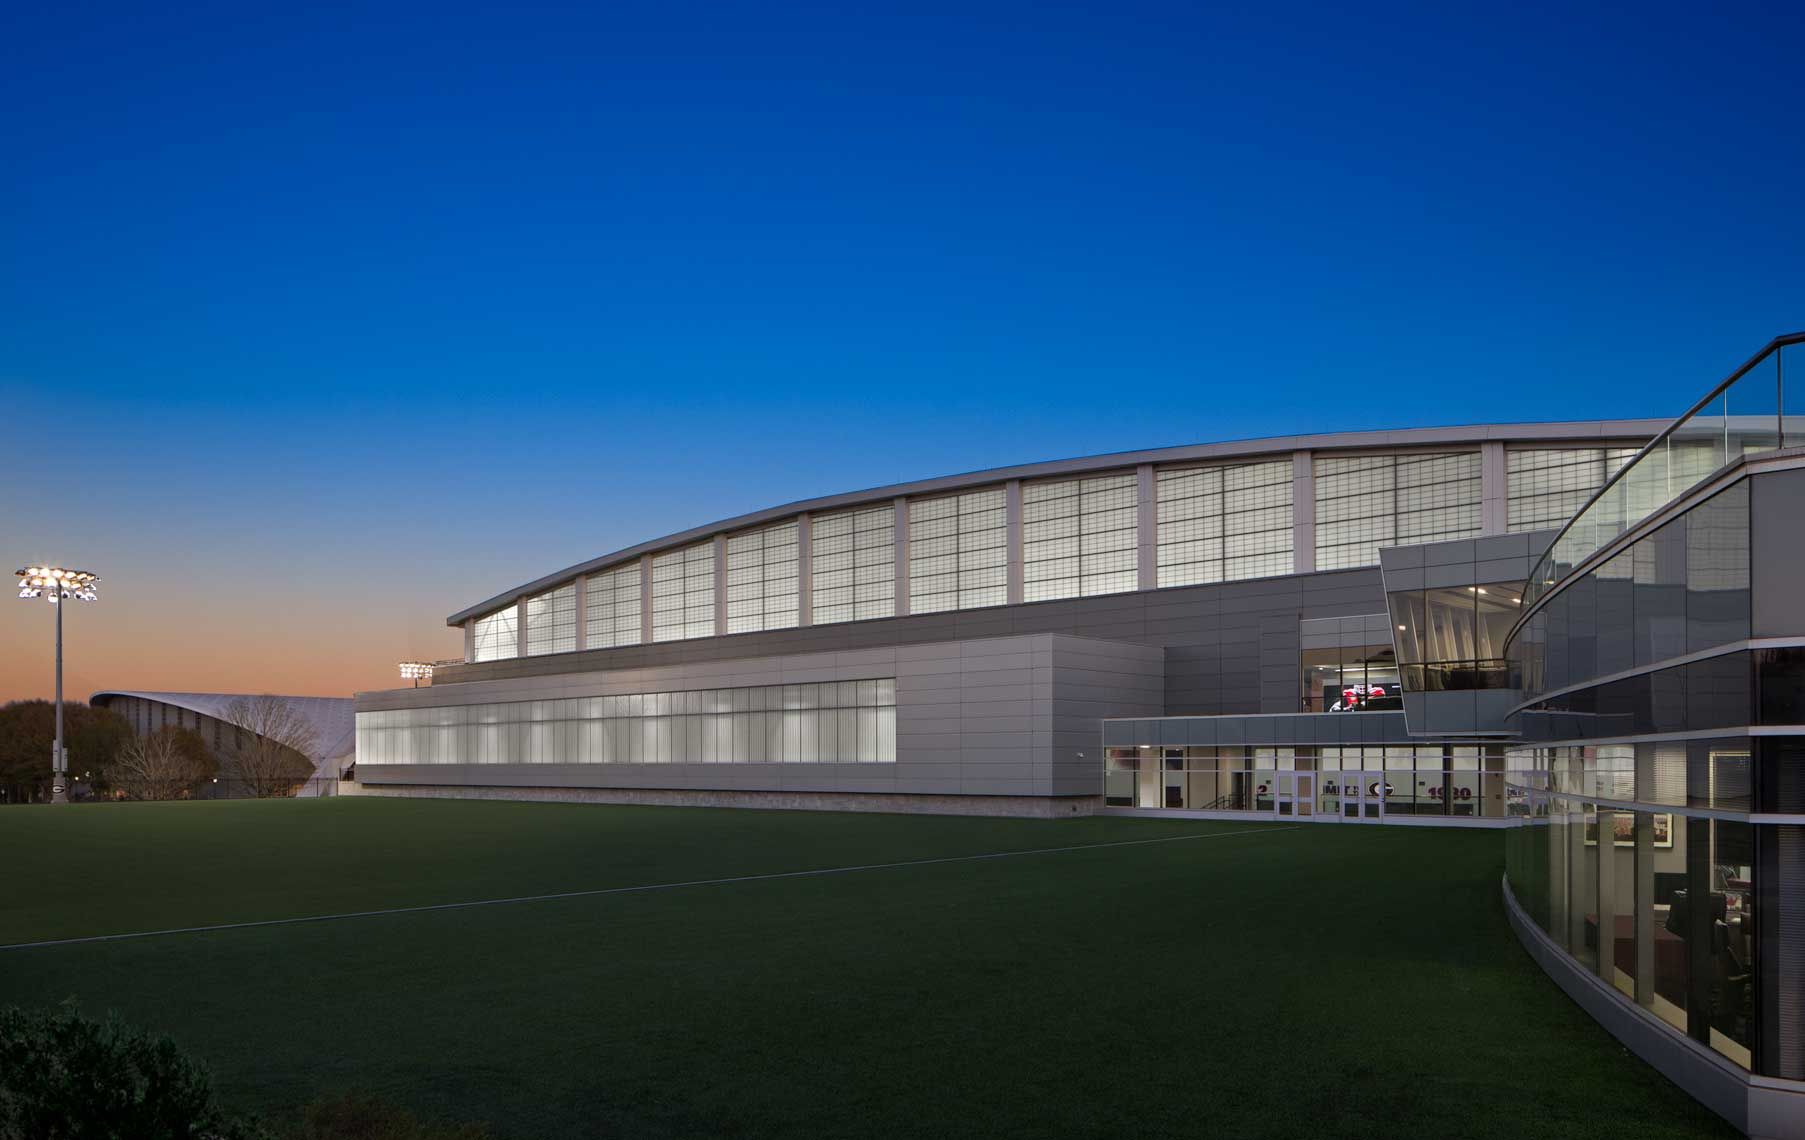 An exterior twilight view of a close-up of the University of Georgia Indoor Athletic Facility